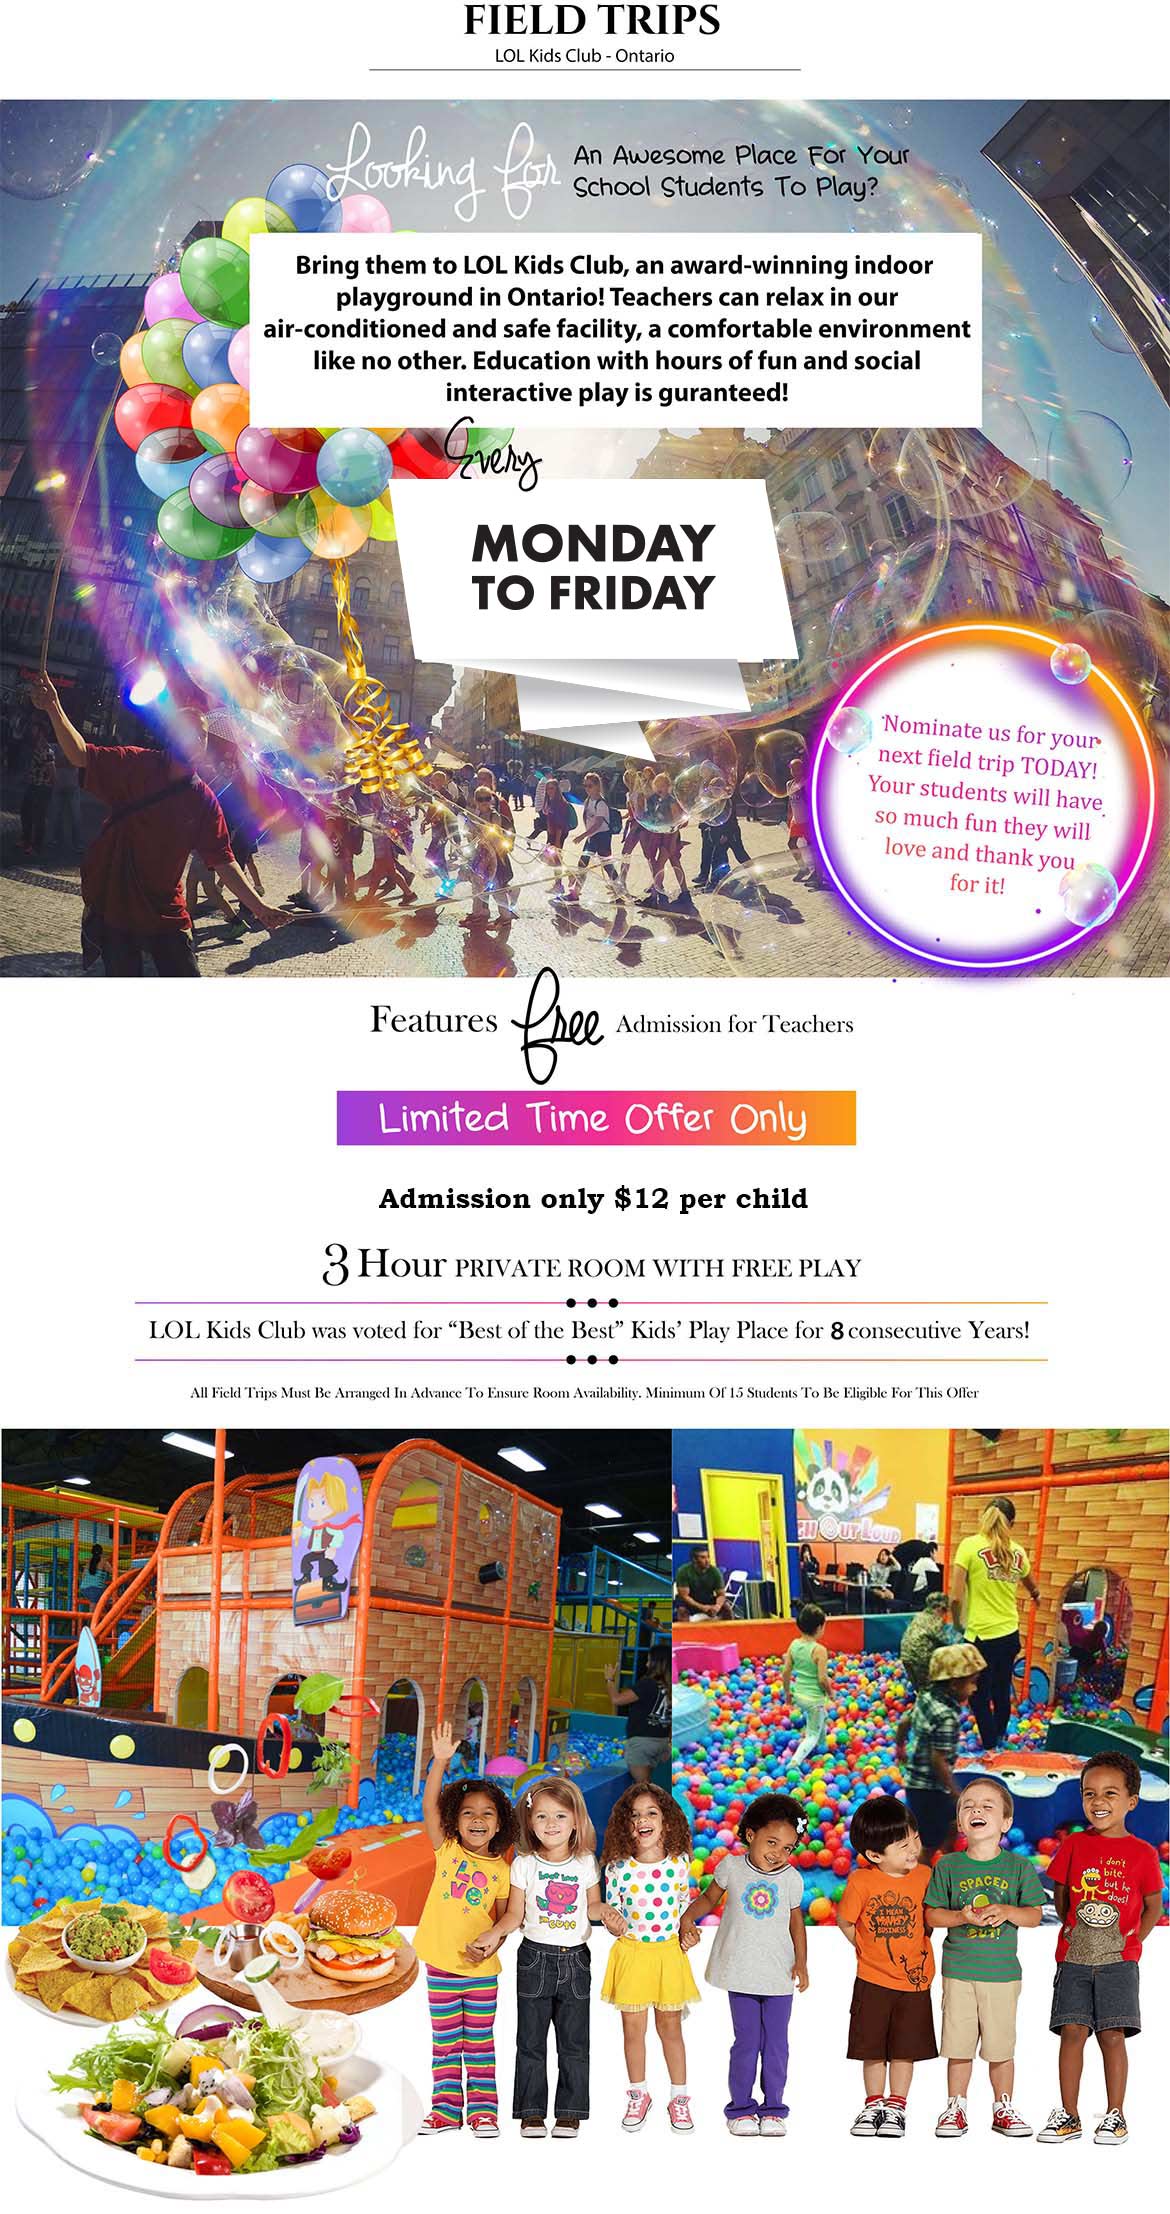 Field trips for kids in Ontario California